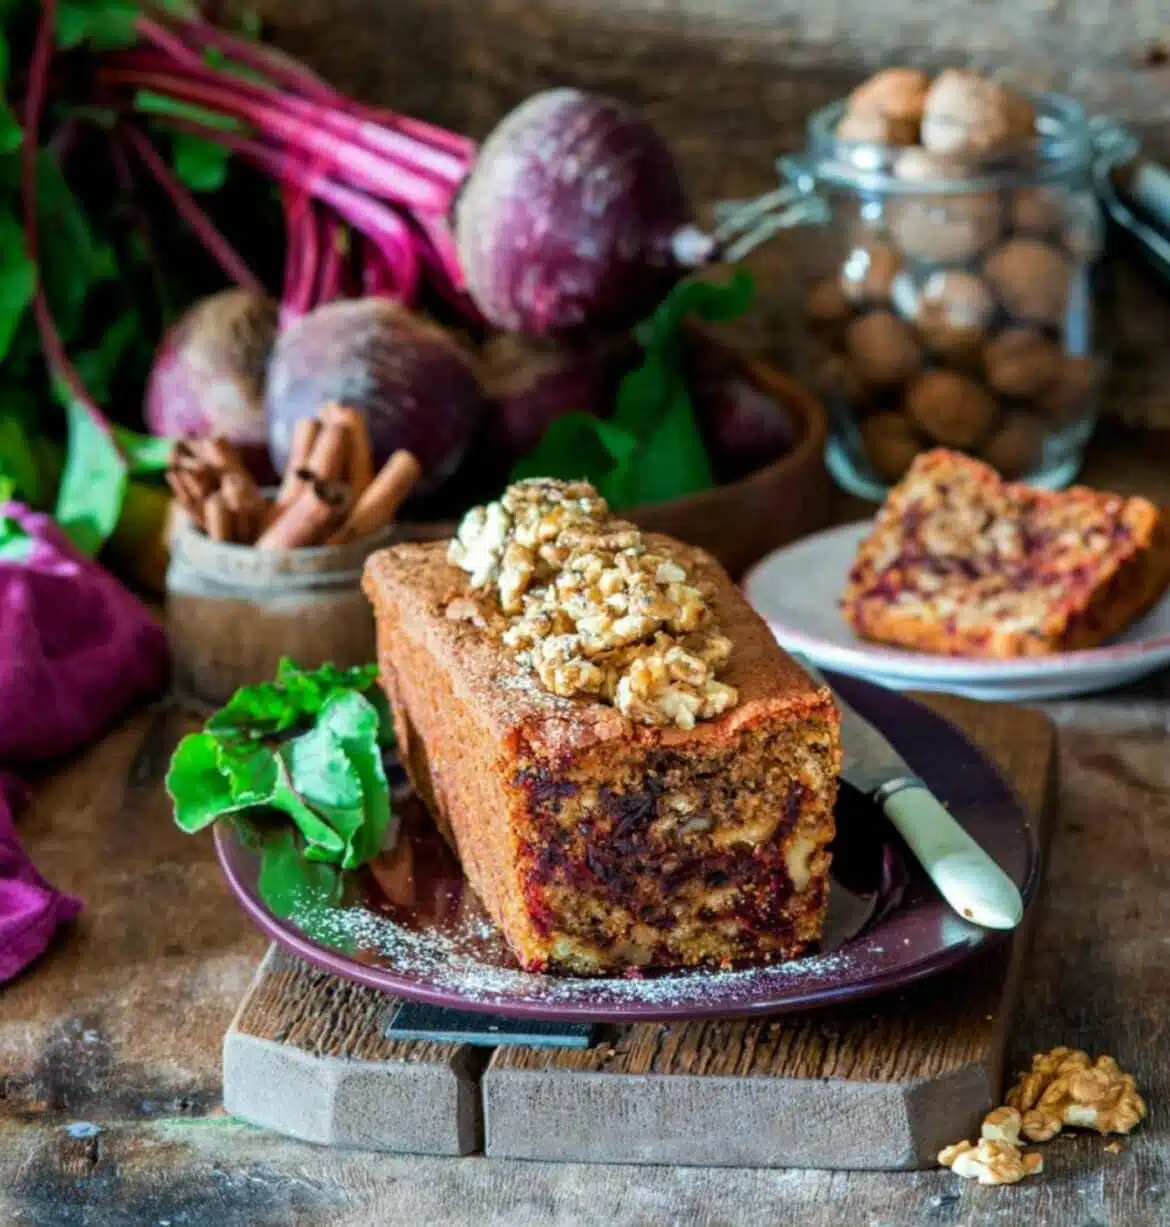 Beetroot cake with walnuts (vegetarian)